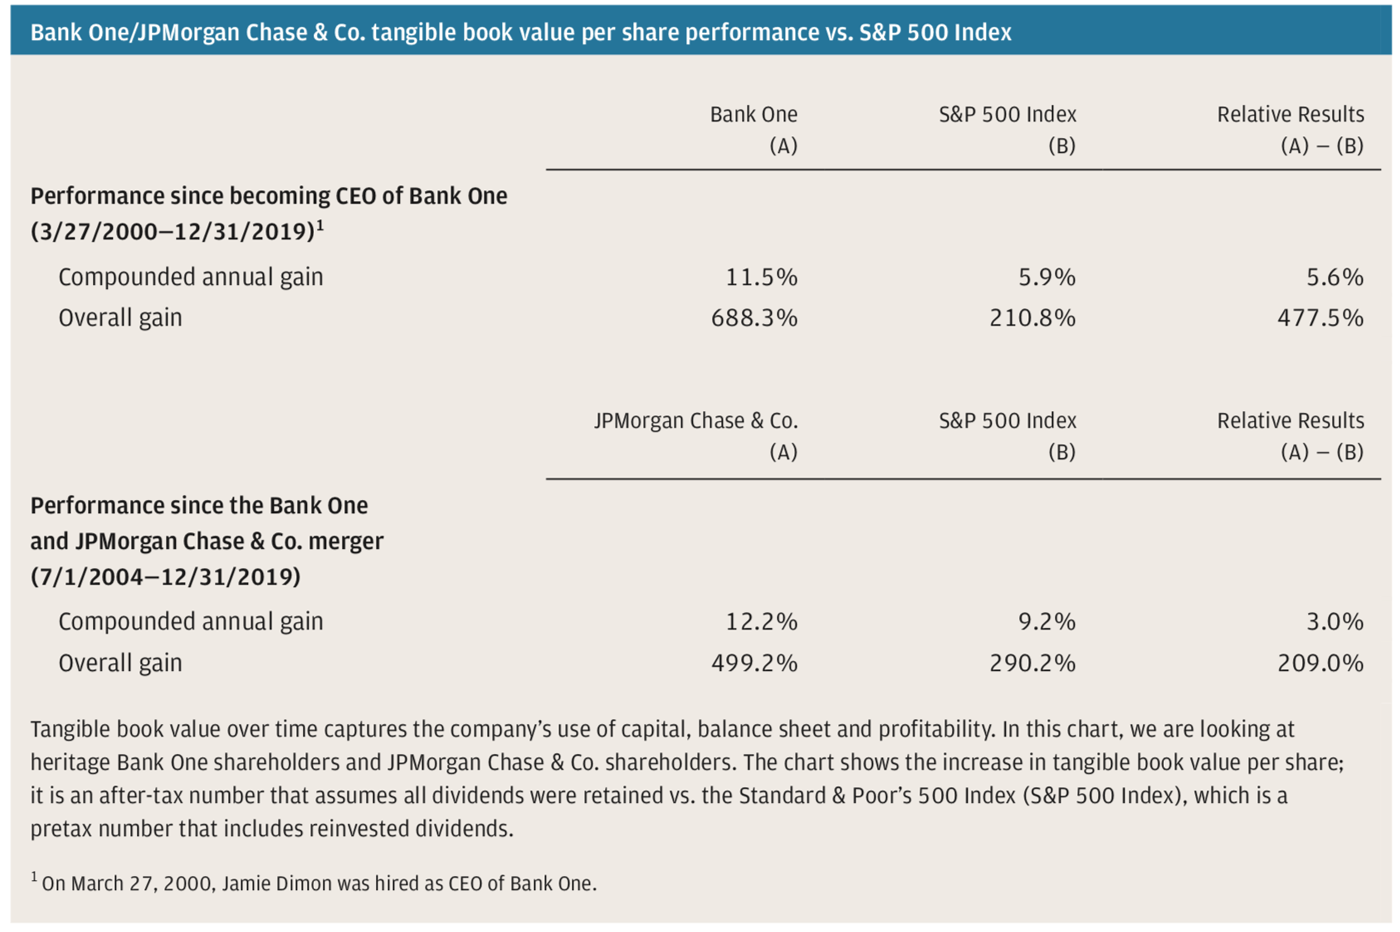 Bank One/JPMorgan Chase & Co. tangible book value per share performance vs. S&P 500 Index 